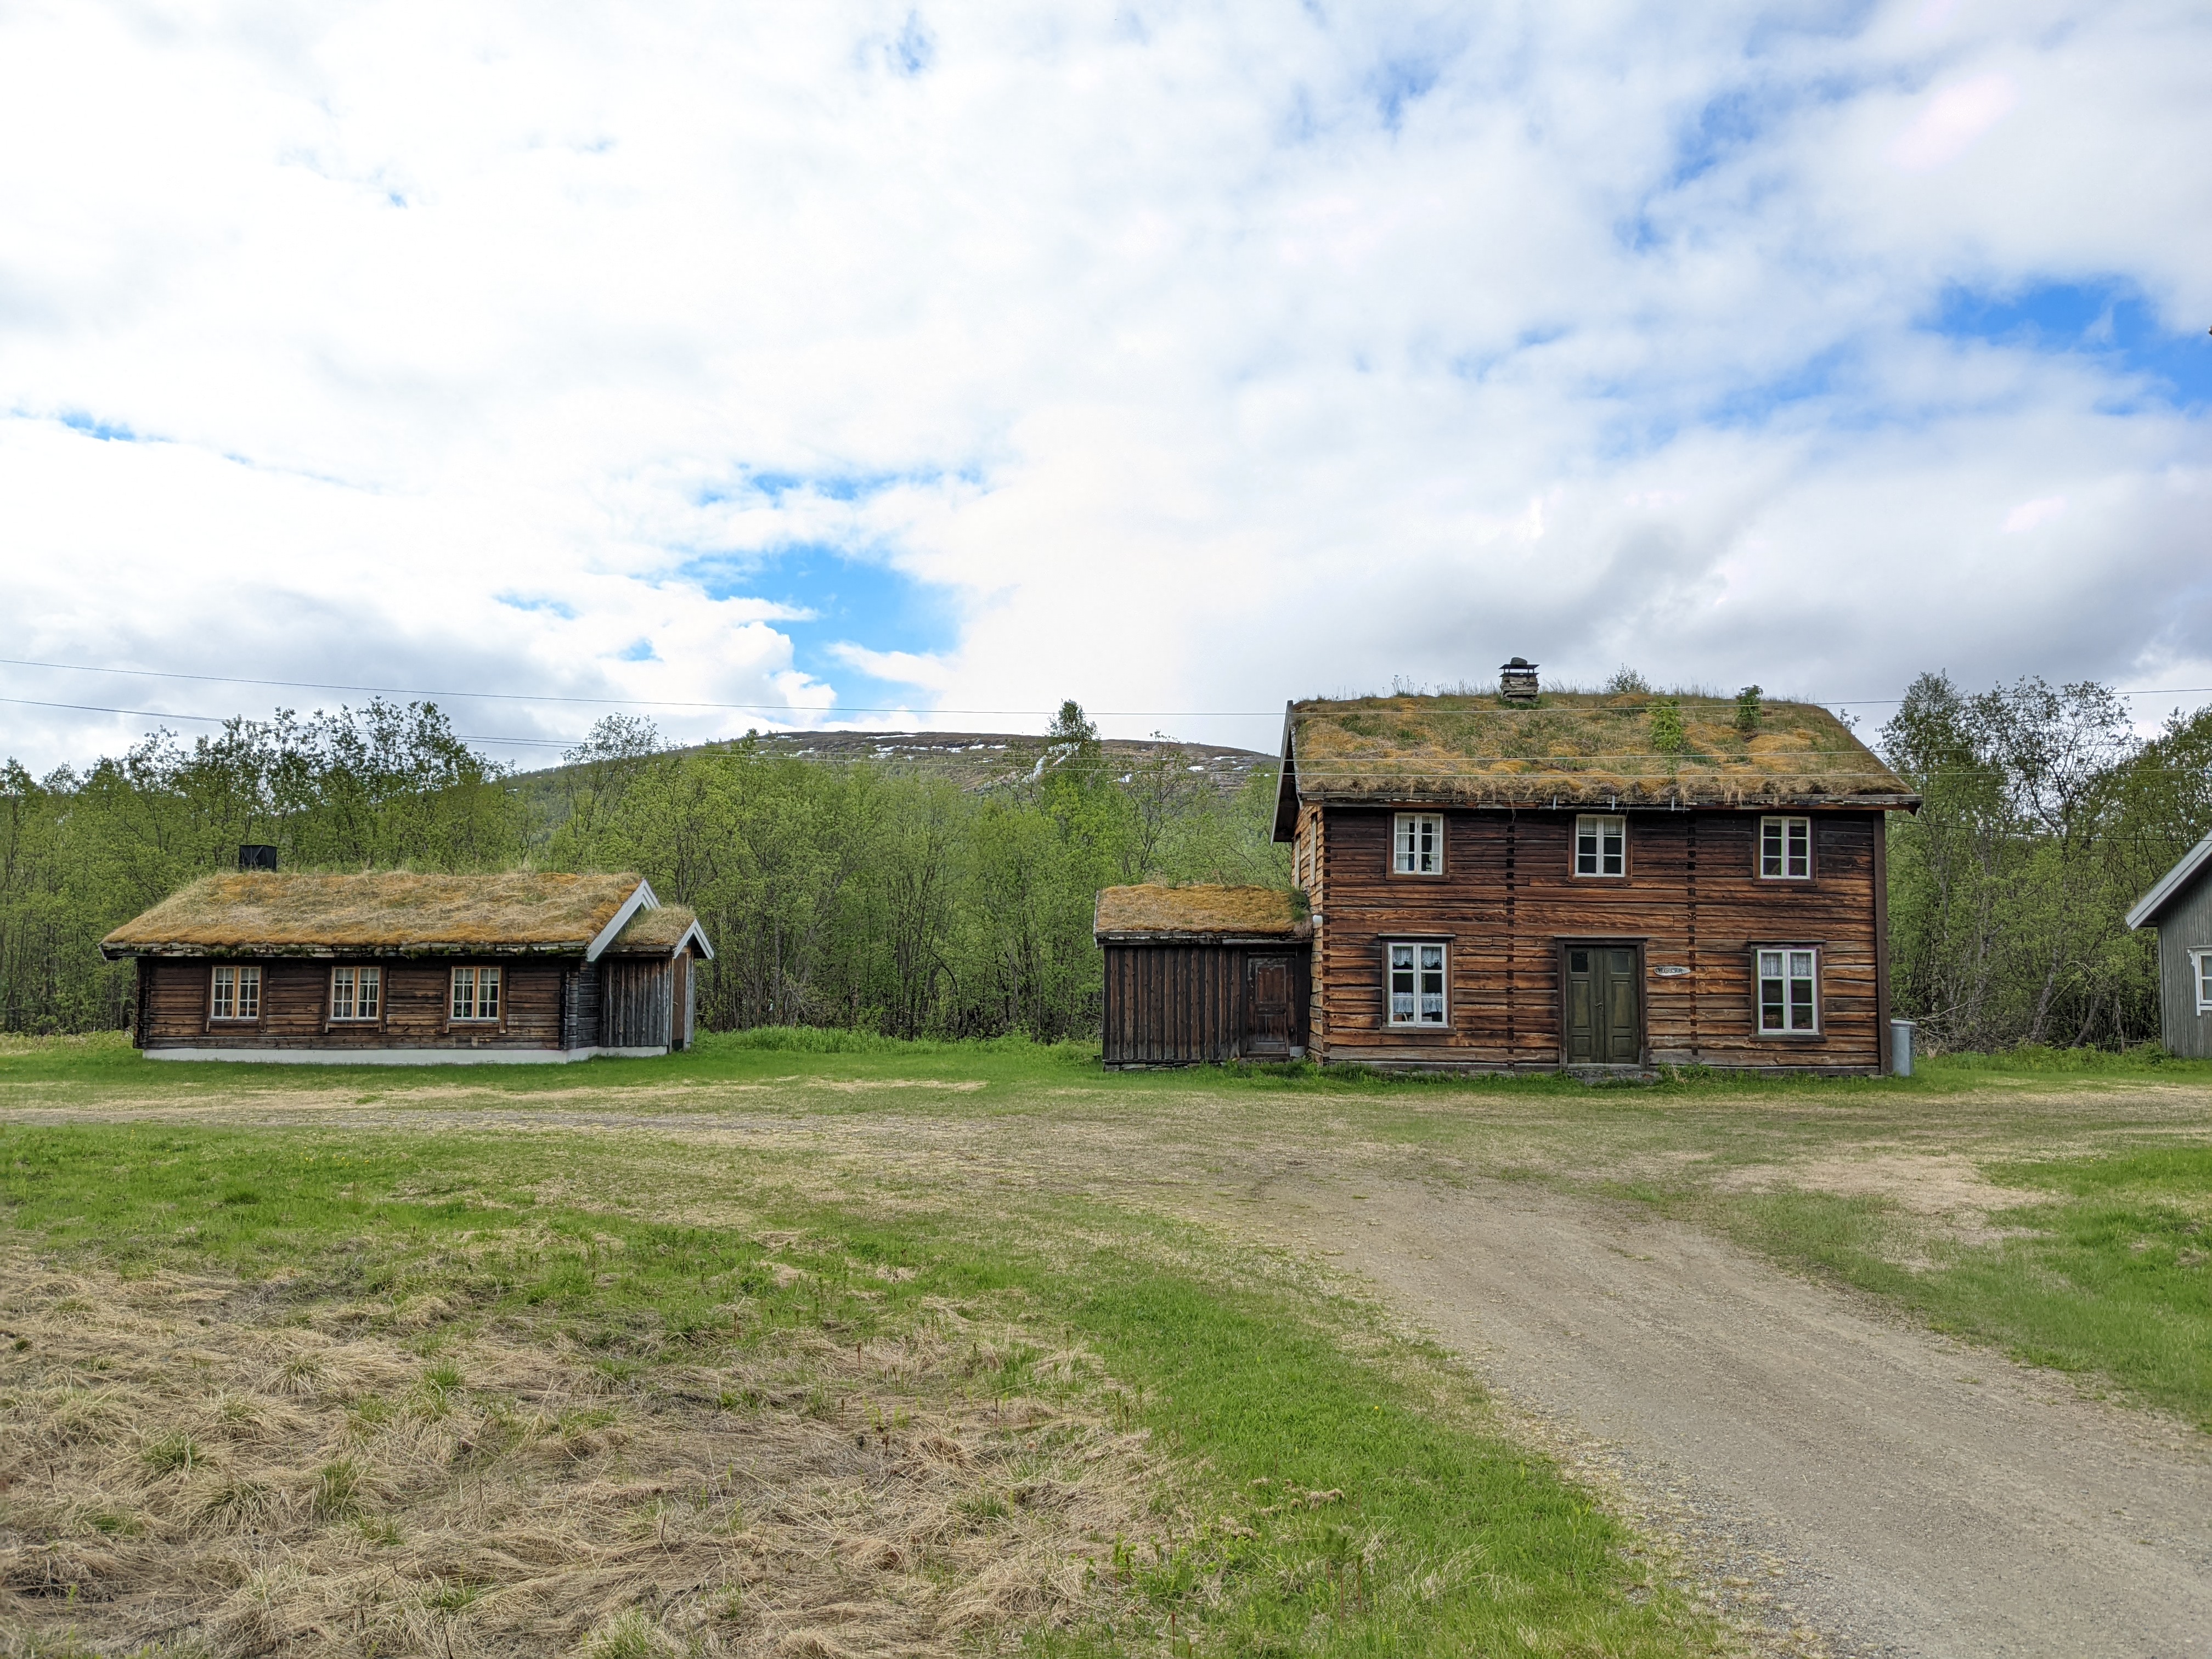 two old square-cut log cabins, one larger and one smaller, with sod rooves